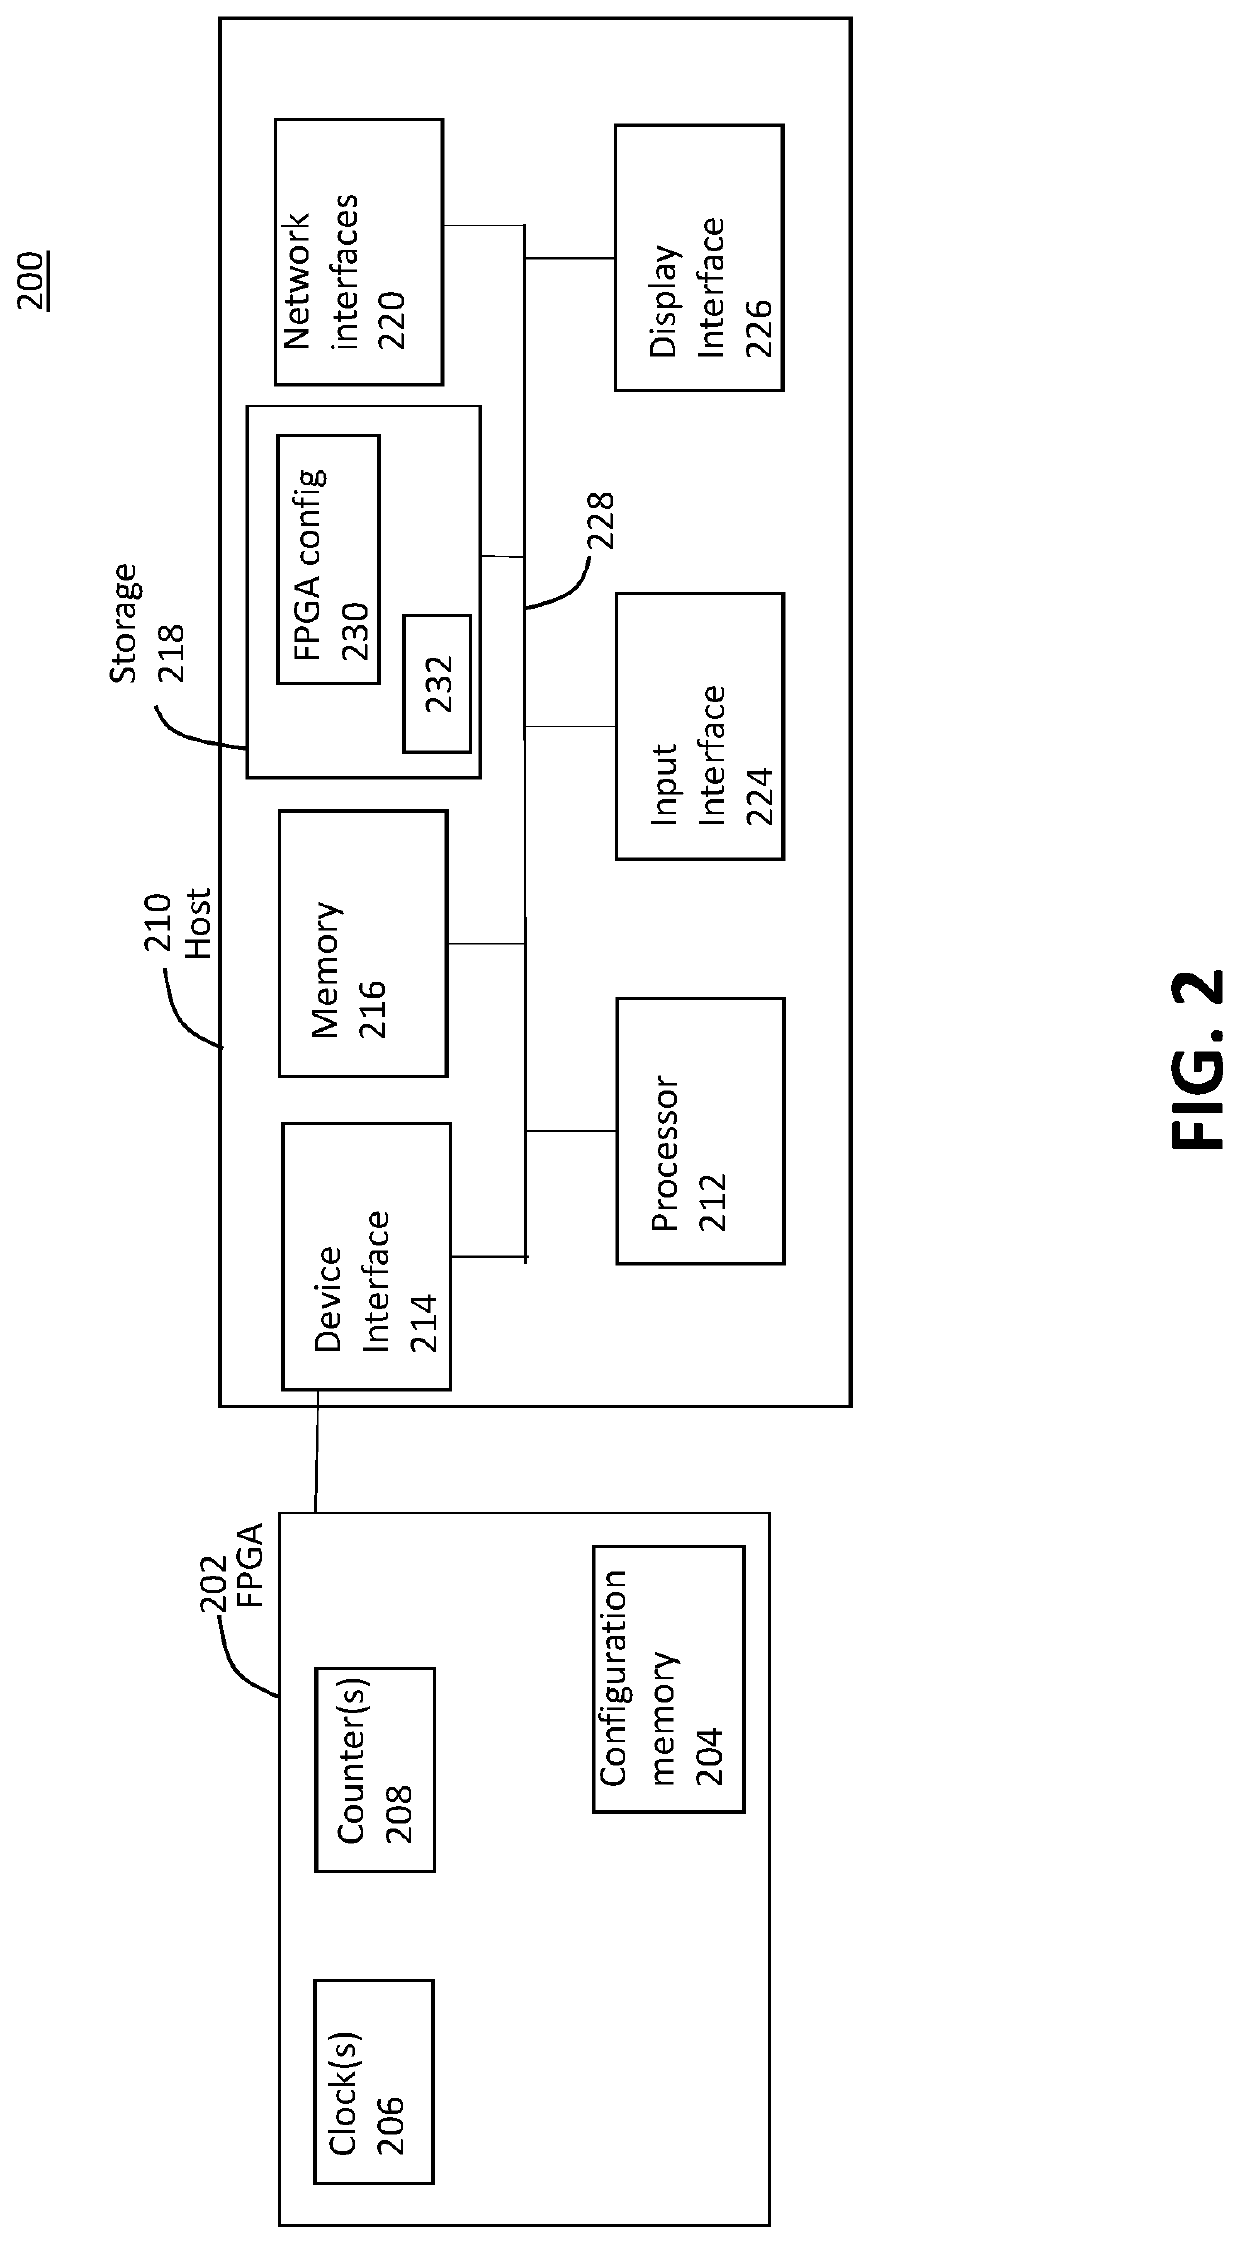 Systems and/or methods for anomaly detection and characterization in integrated circuits